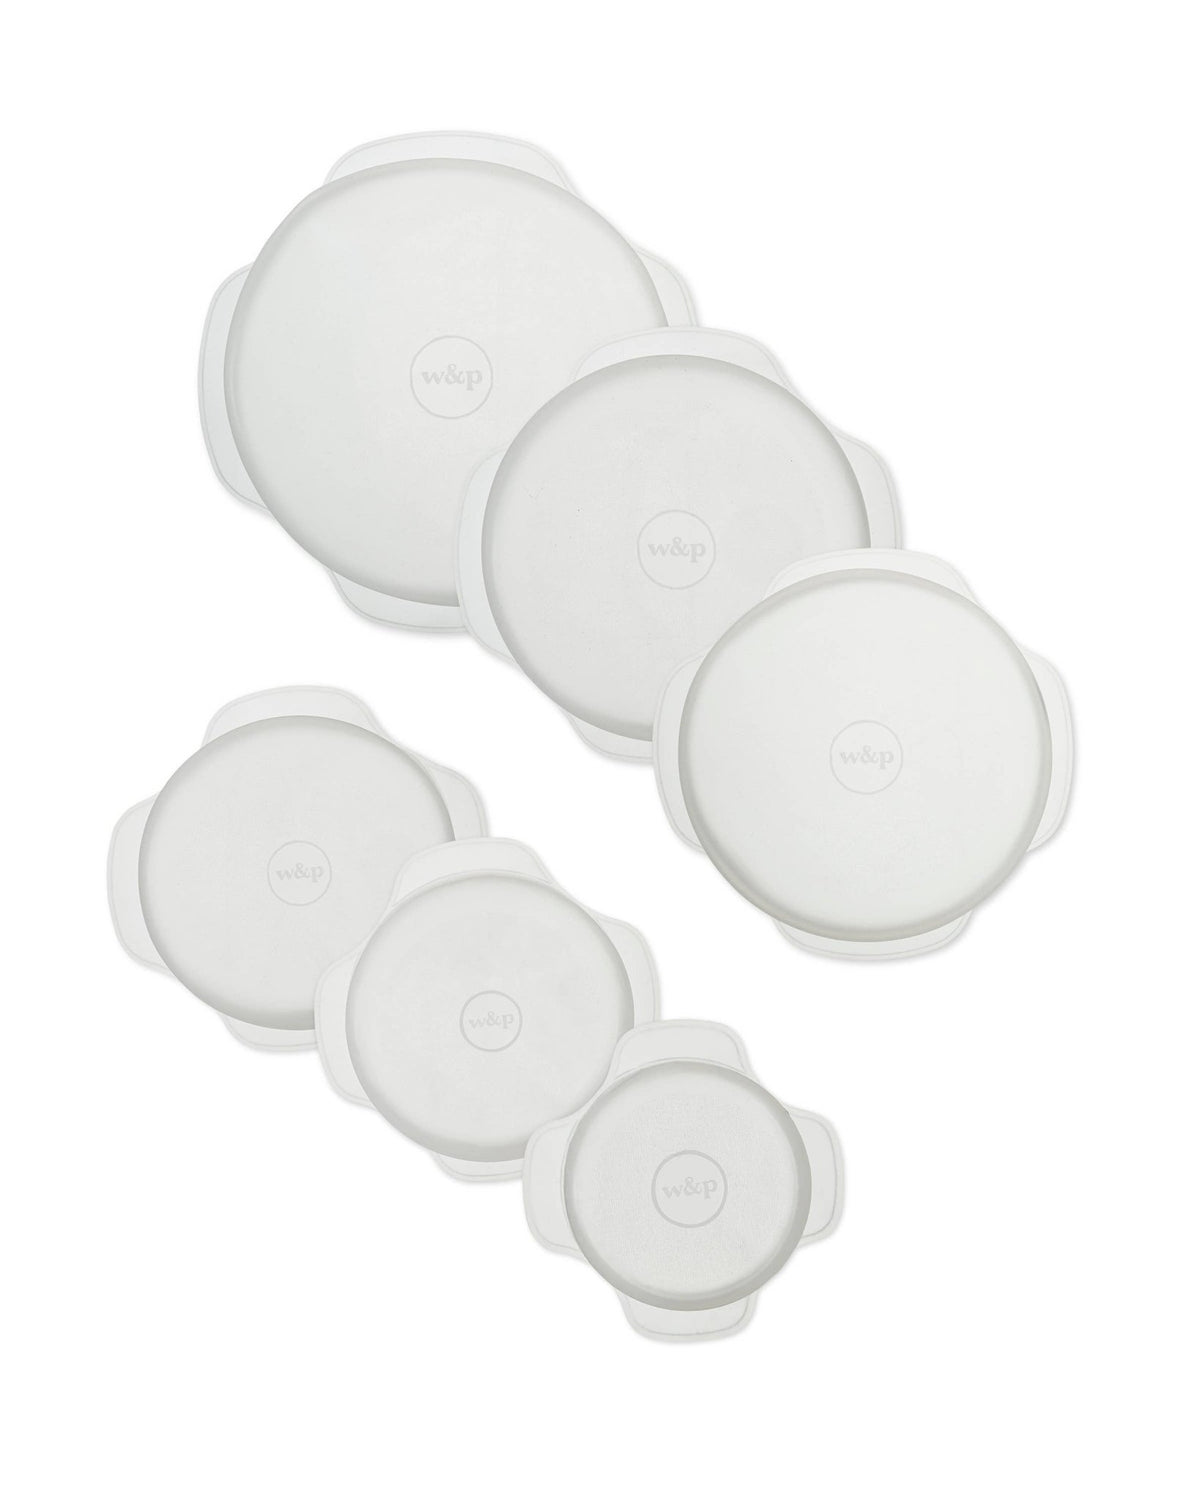 Reusable Stretch Silicone Lids - Set of 6 - Gift & Gather